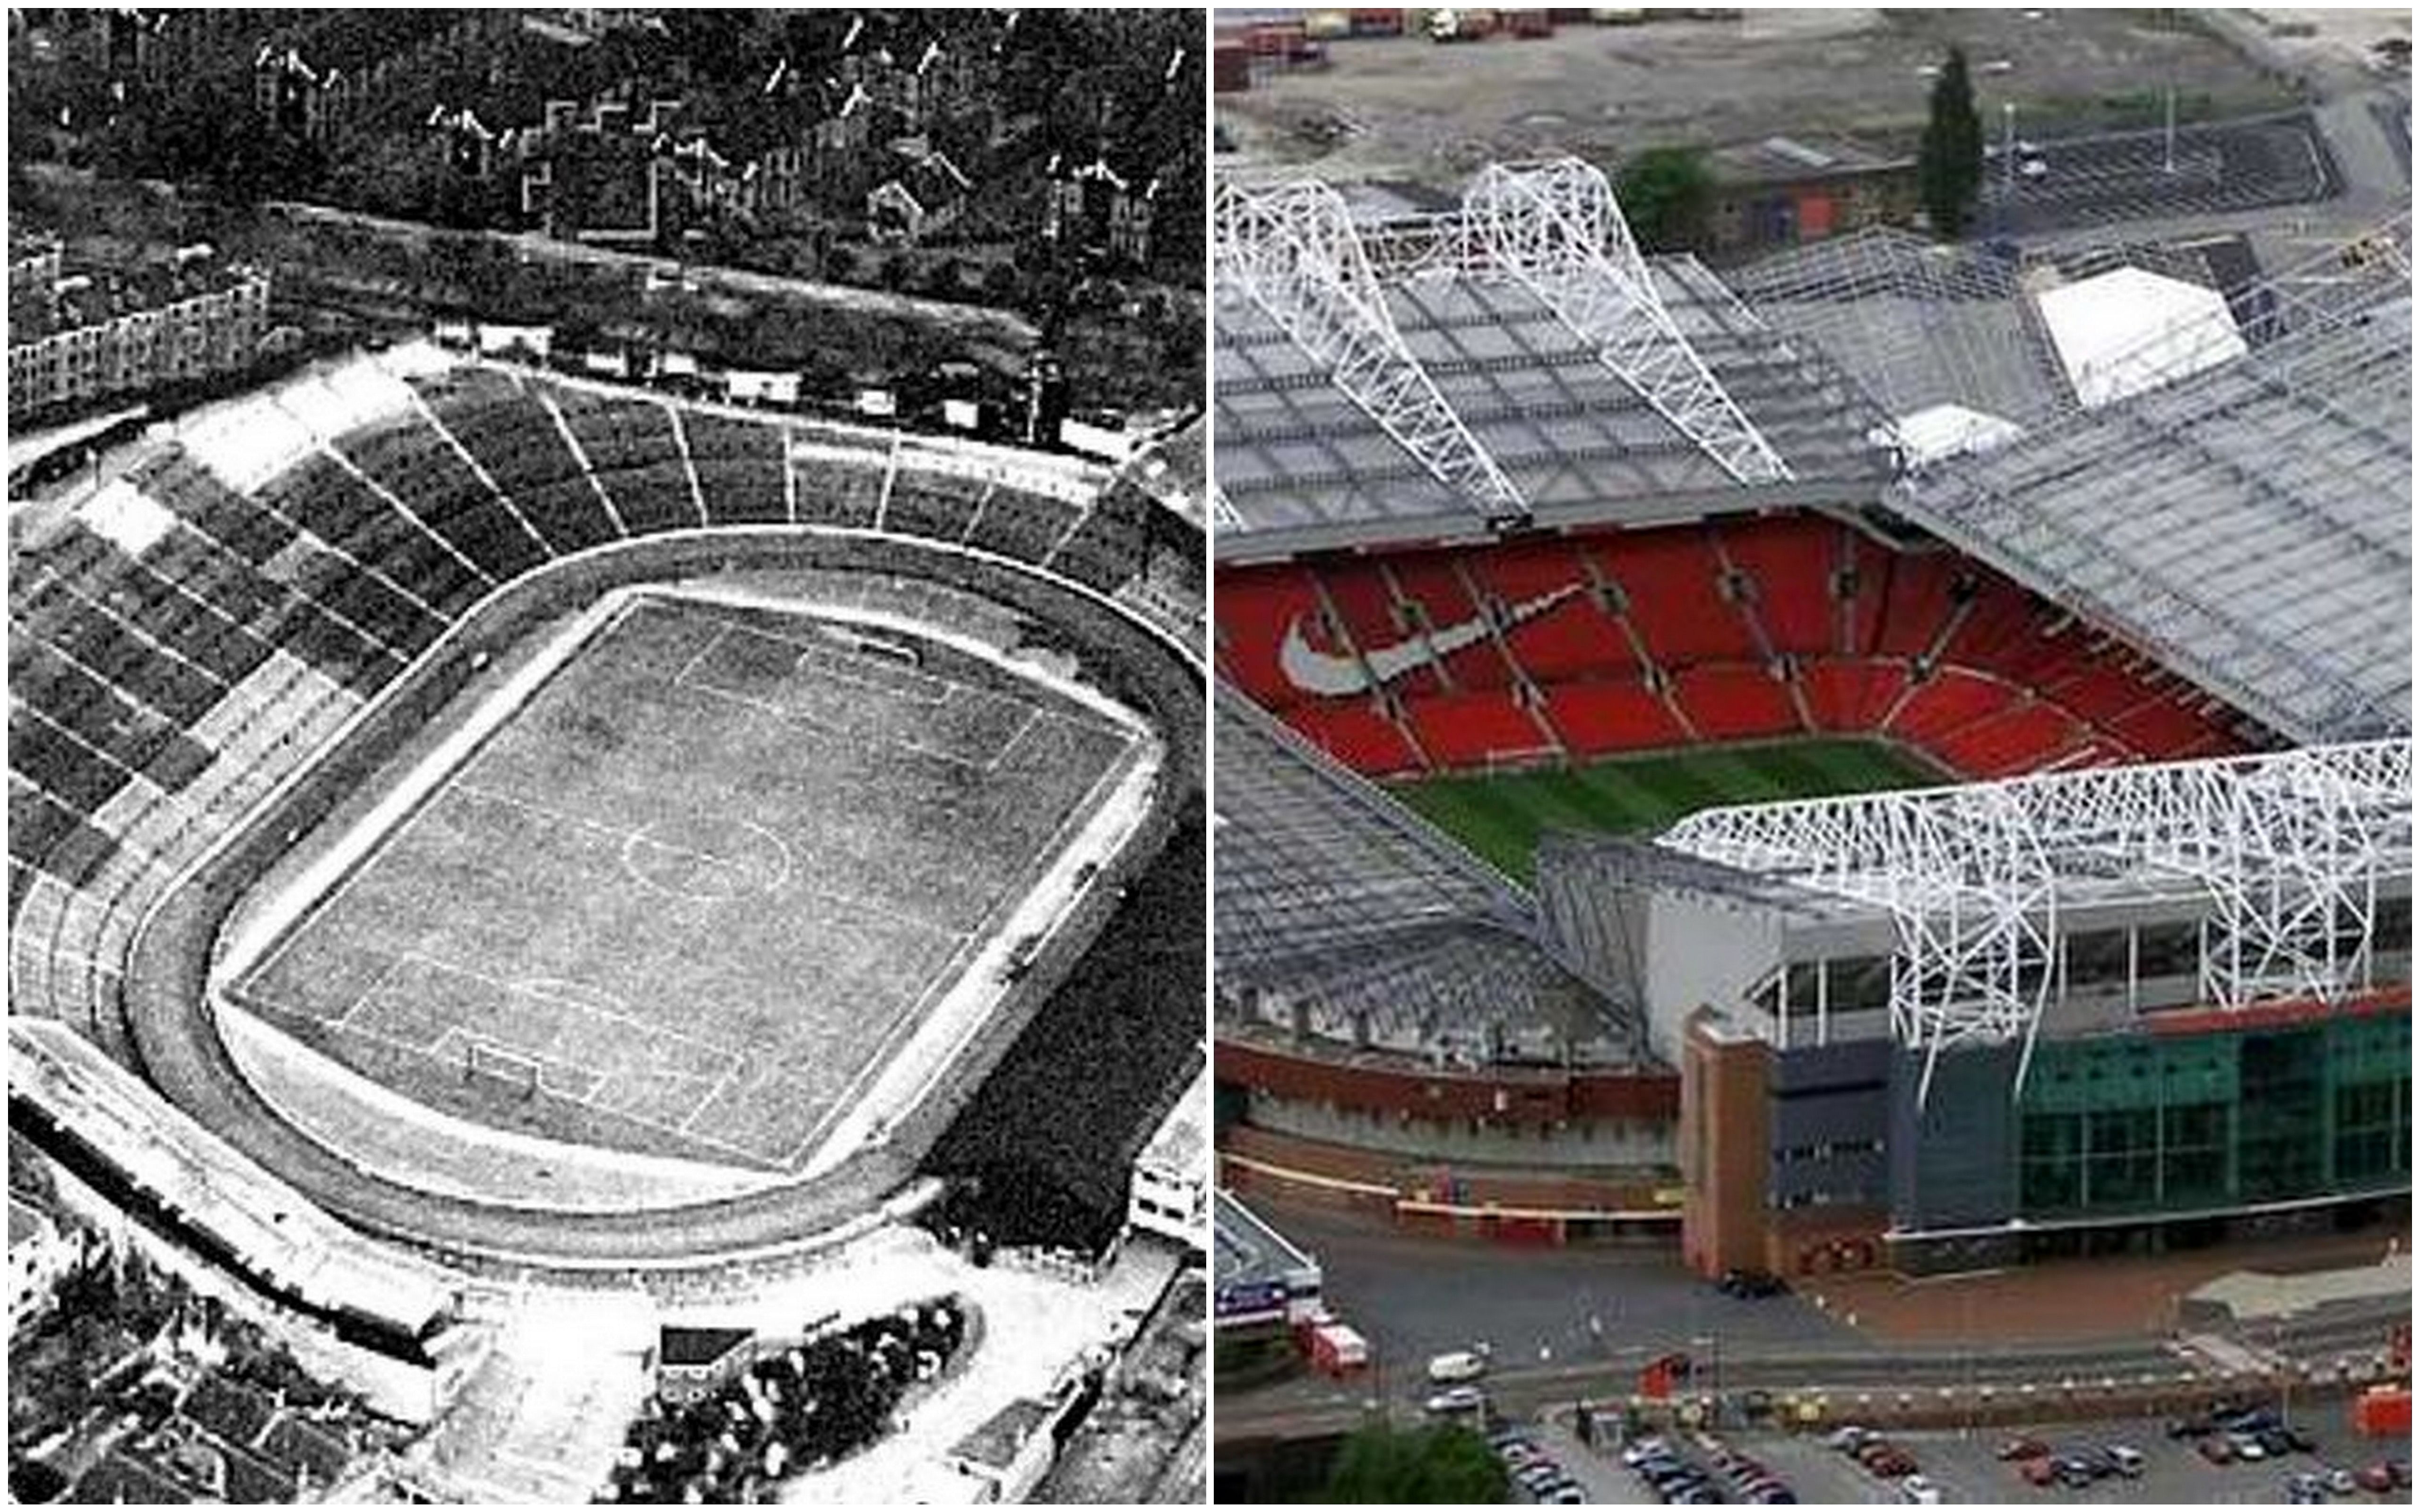 10 Iconic Football Stadiums Then And Now